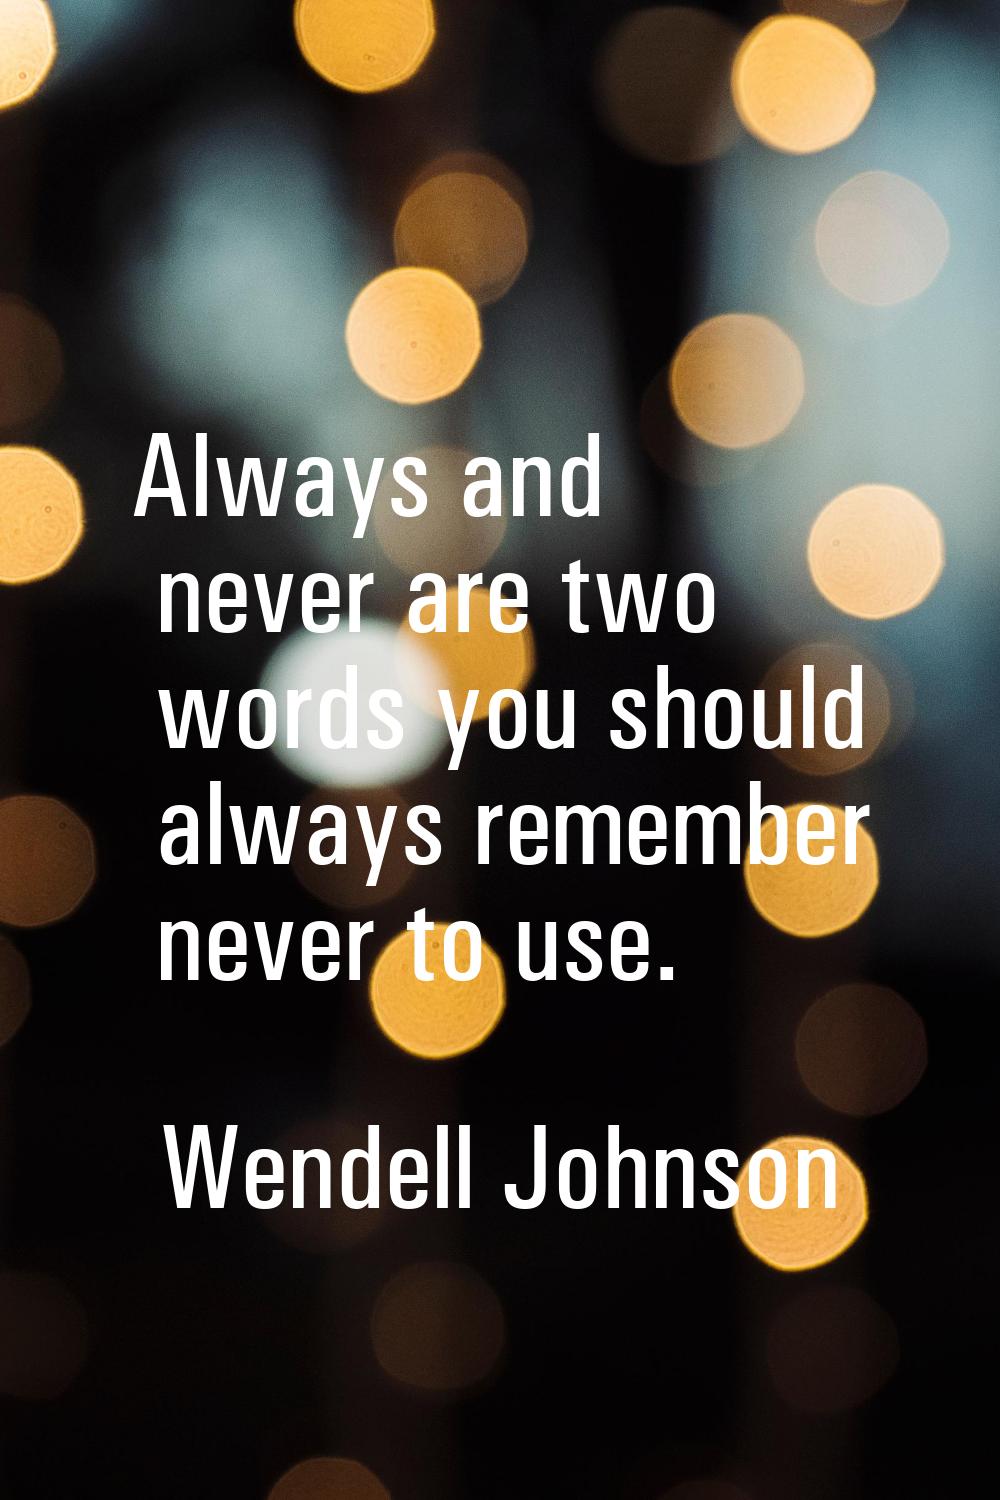 Always and never are two words you should always remember never to use.